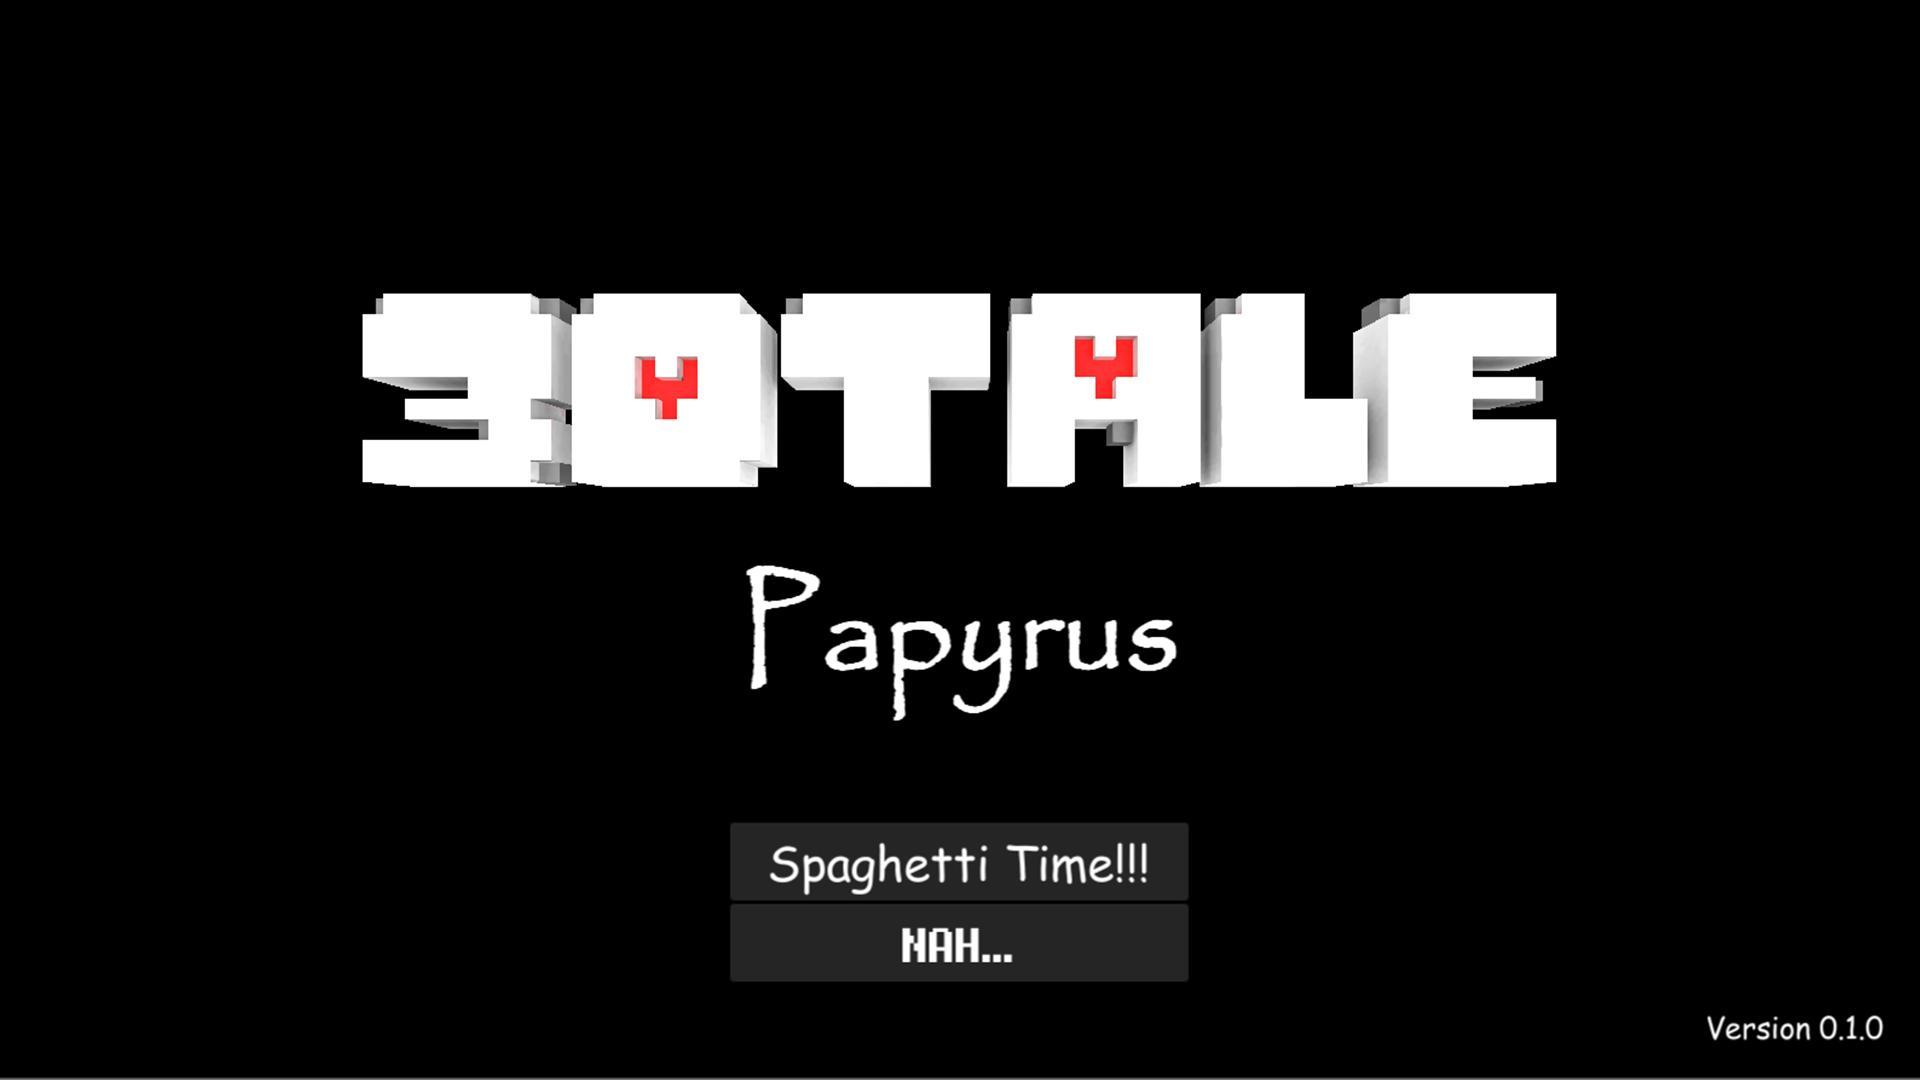 Screenshot 1 of 3DTale - Papyrus 0.2.0